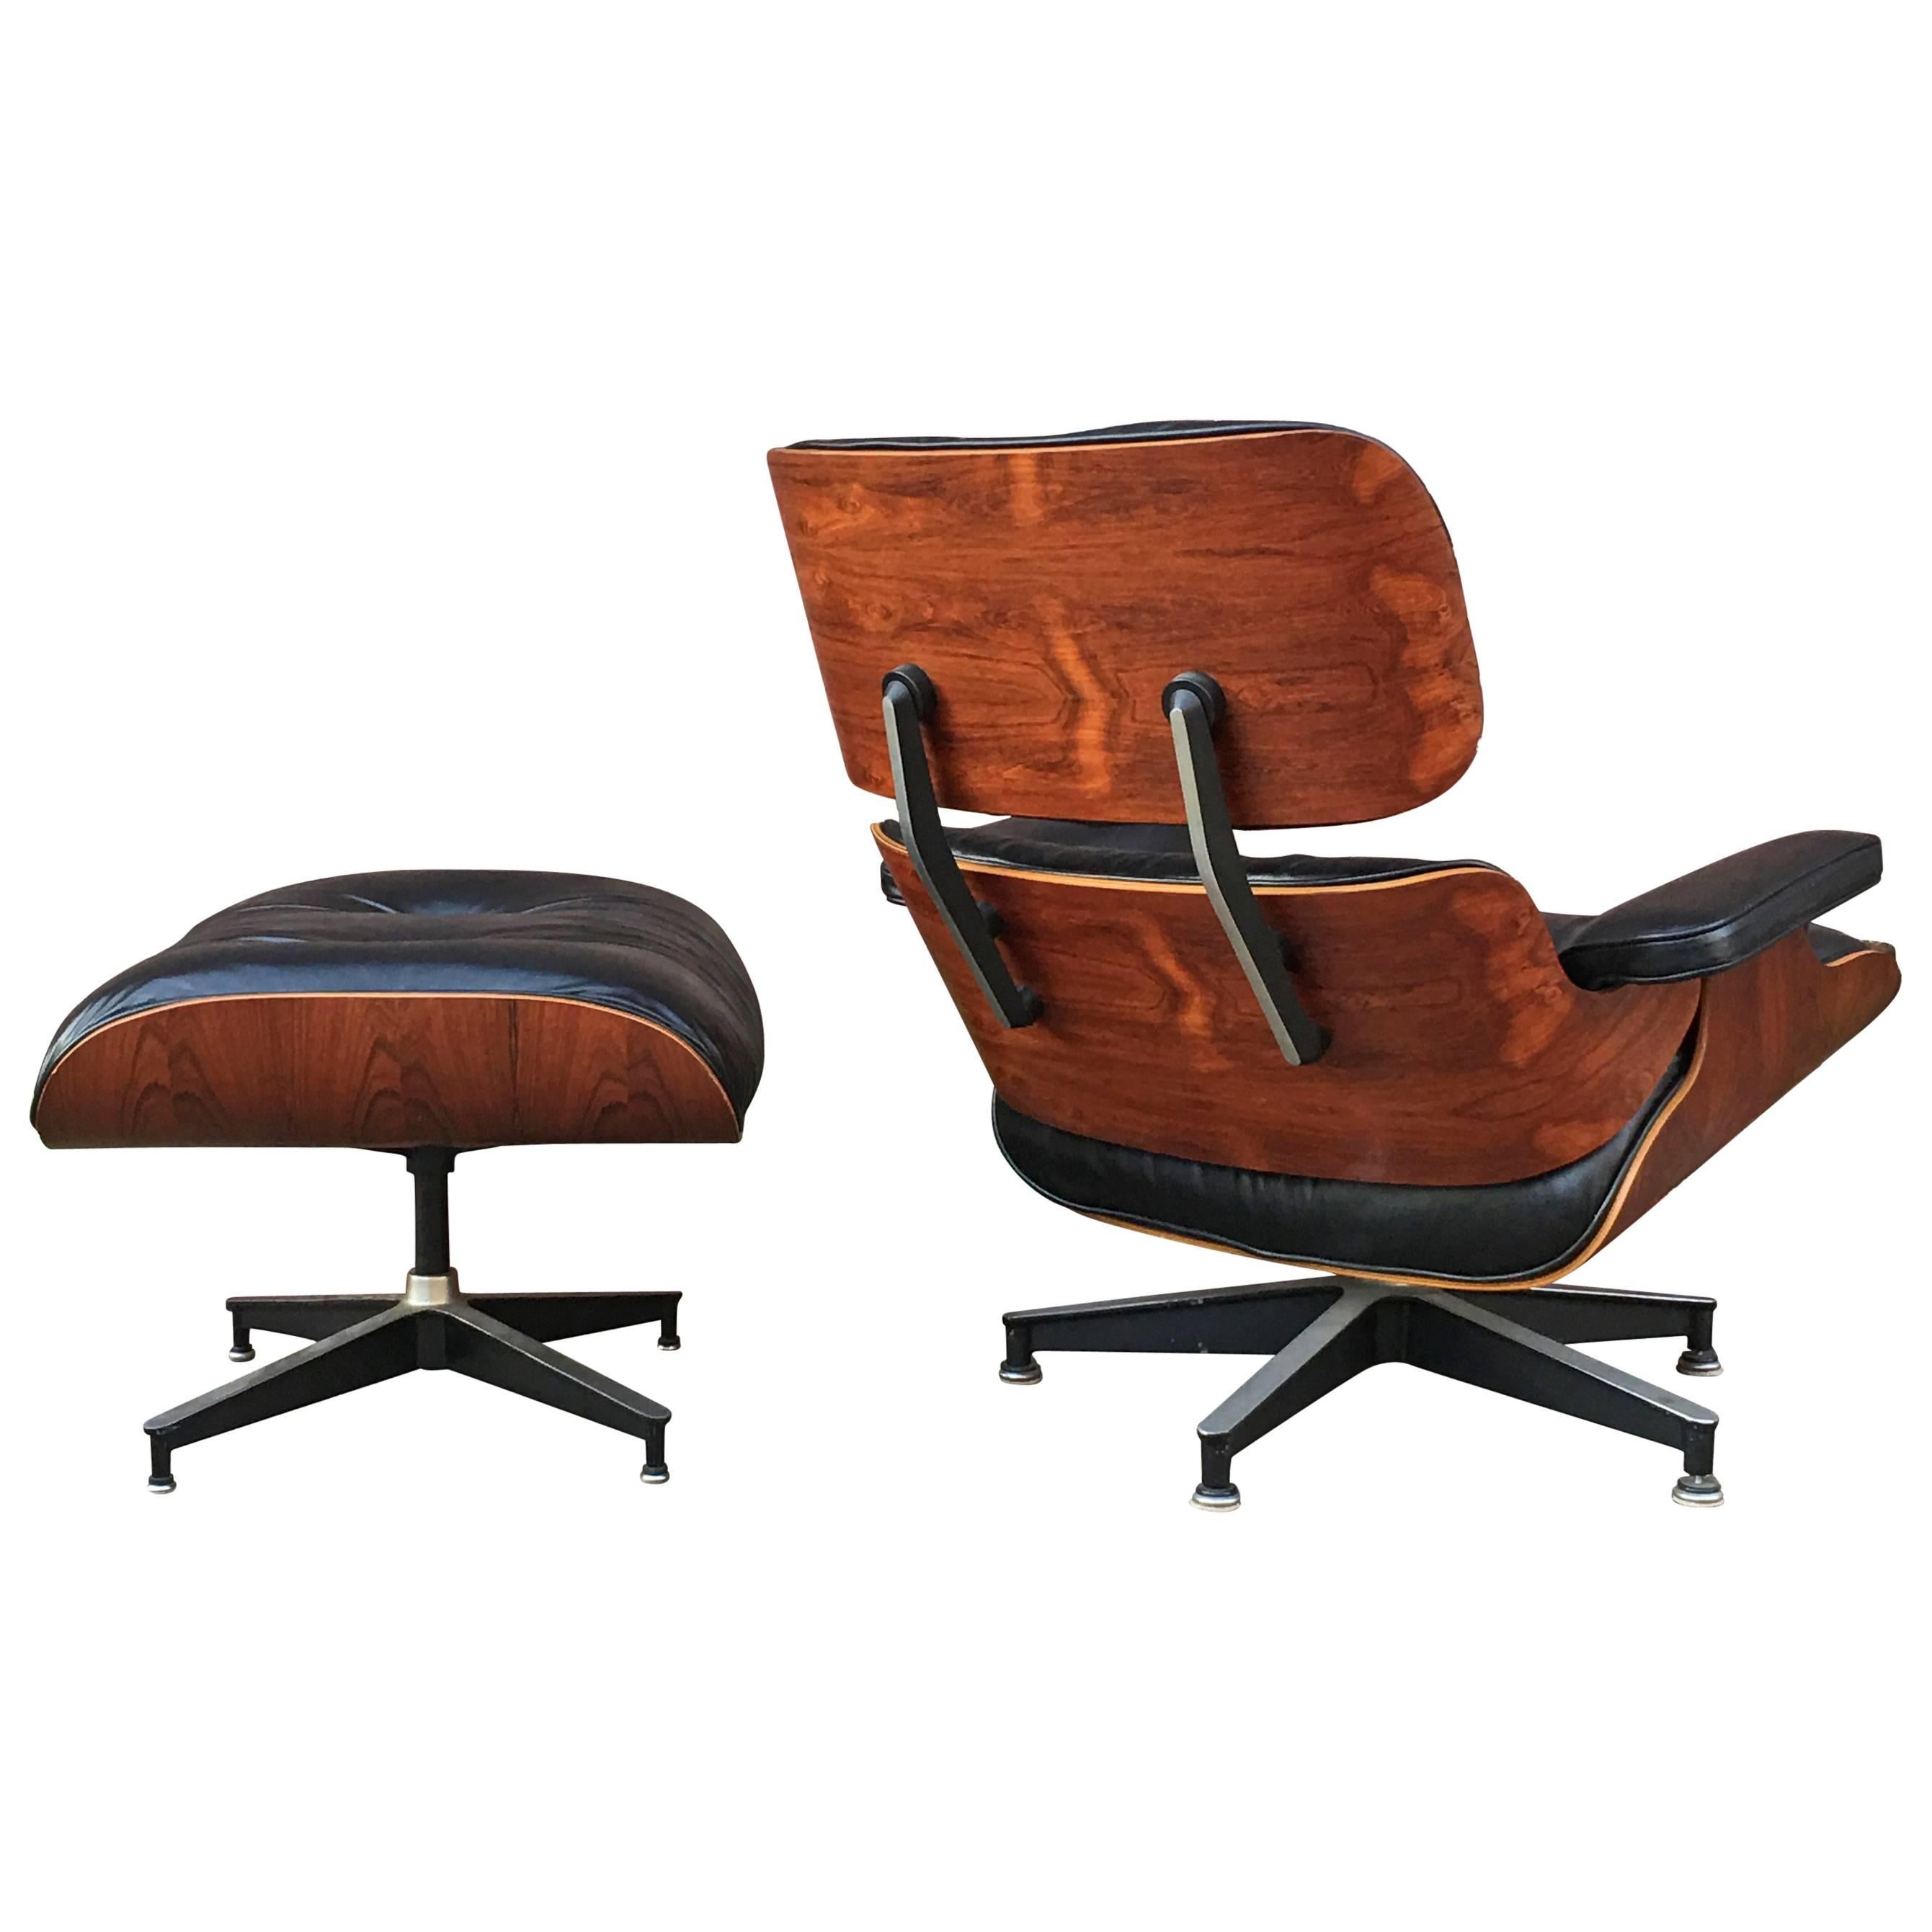 Highly Figured Rosewood Herman Miller Eames Lounge Chair and Ottoman